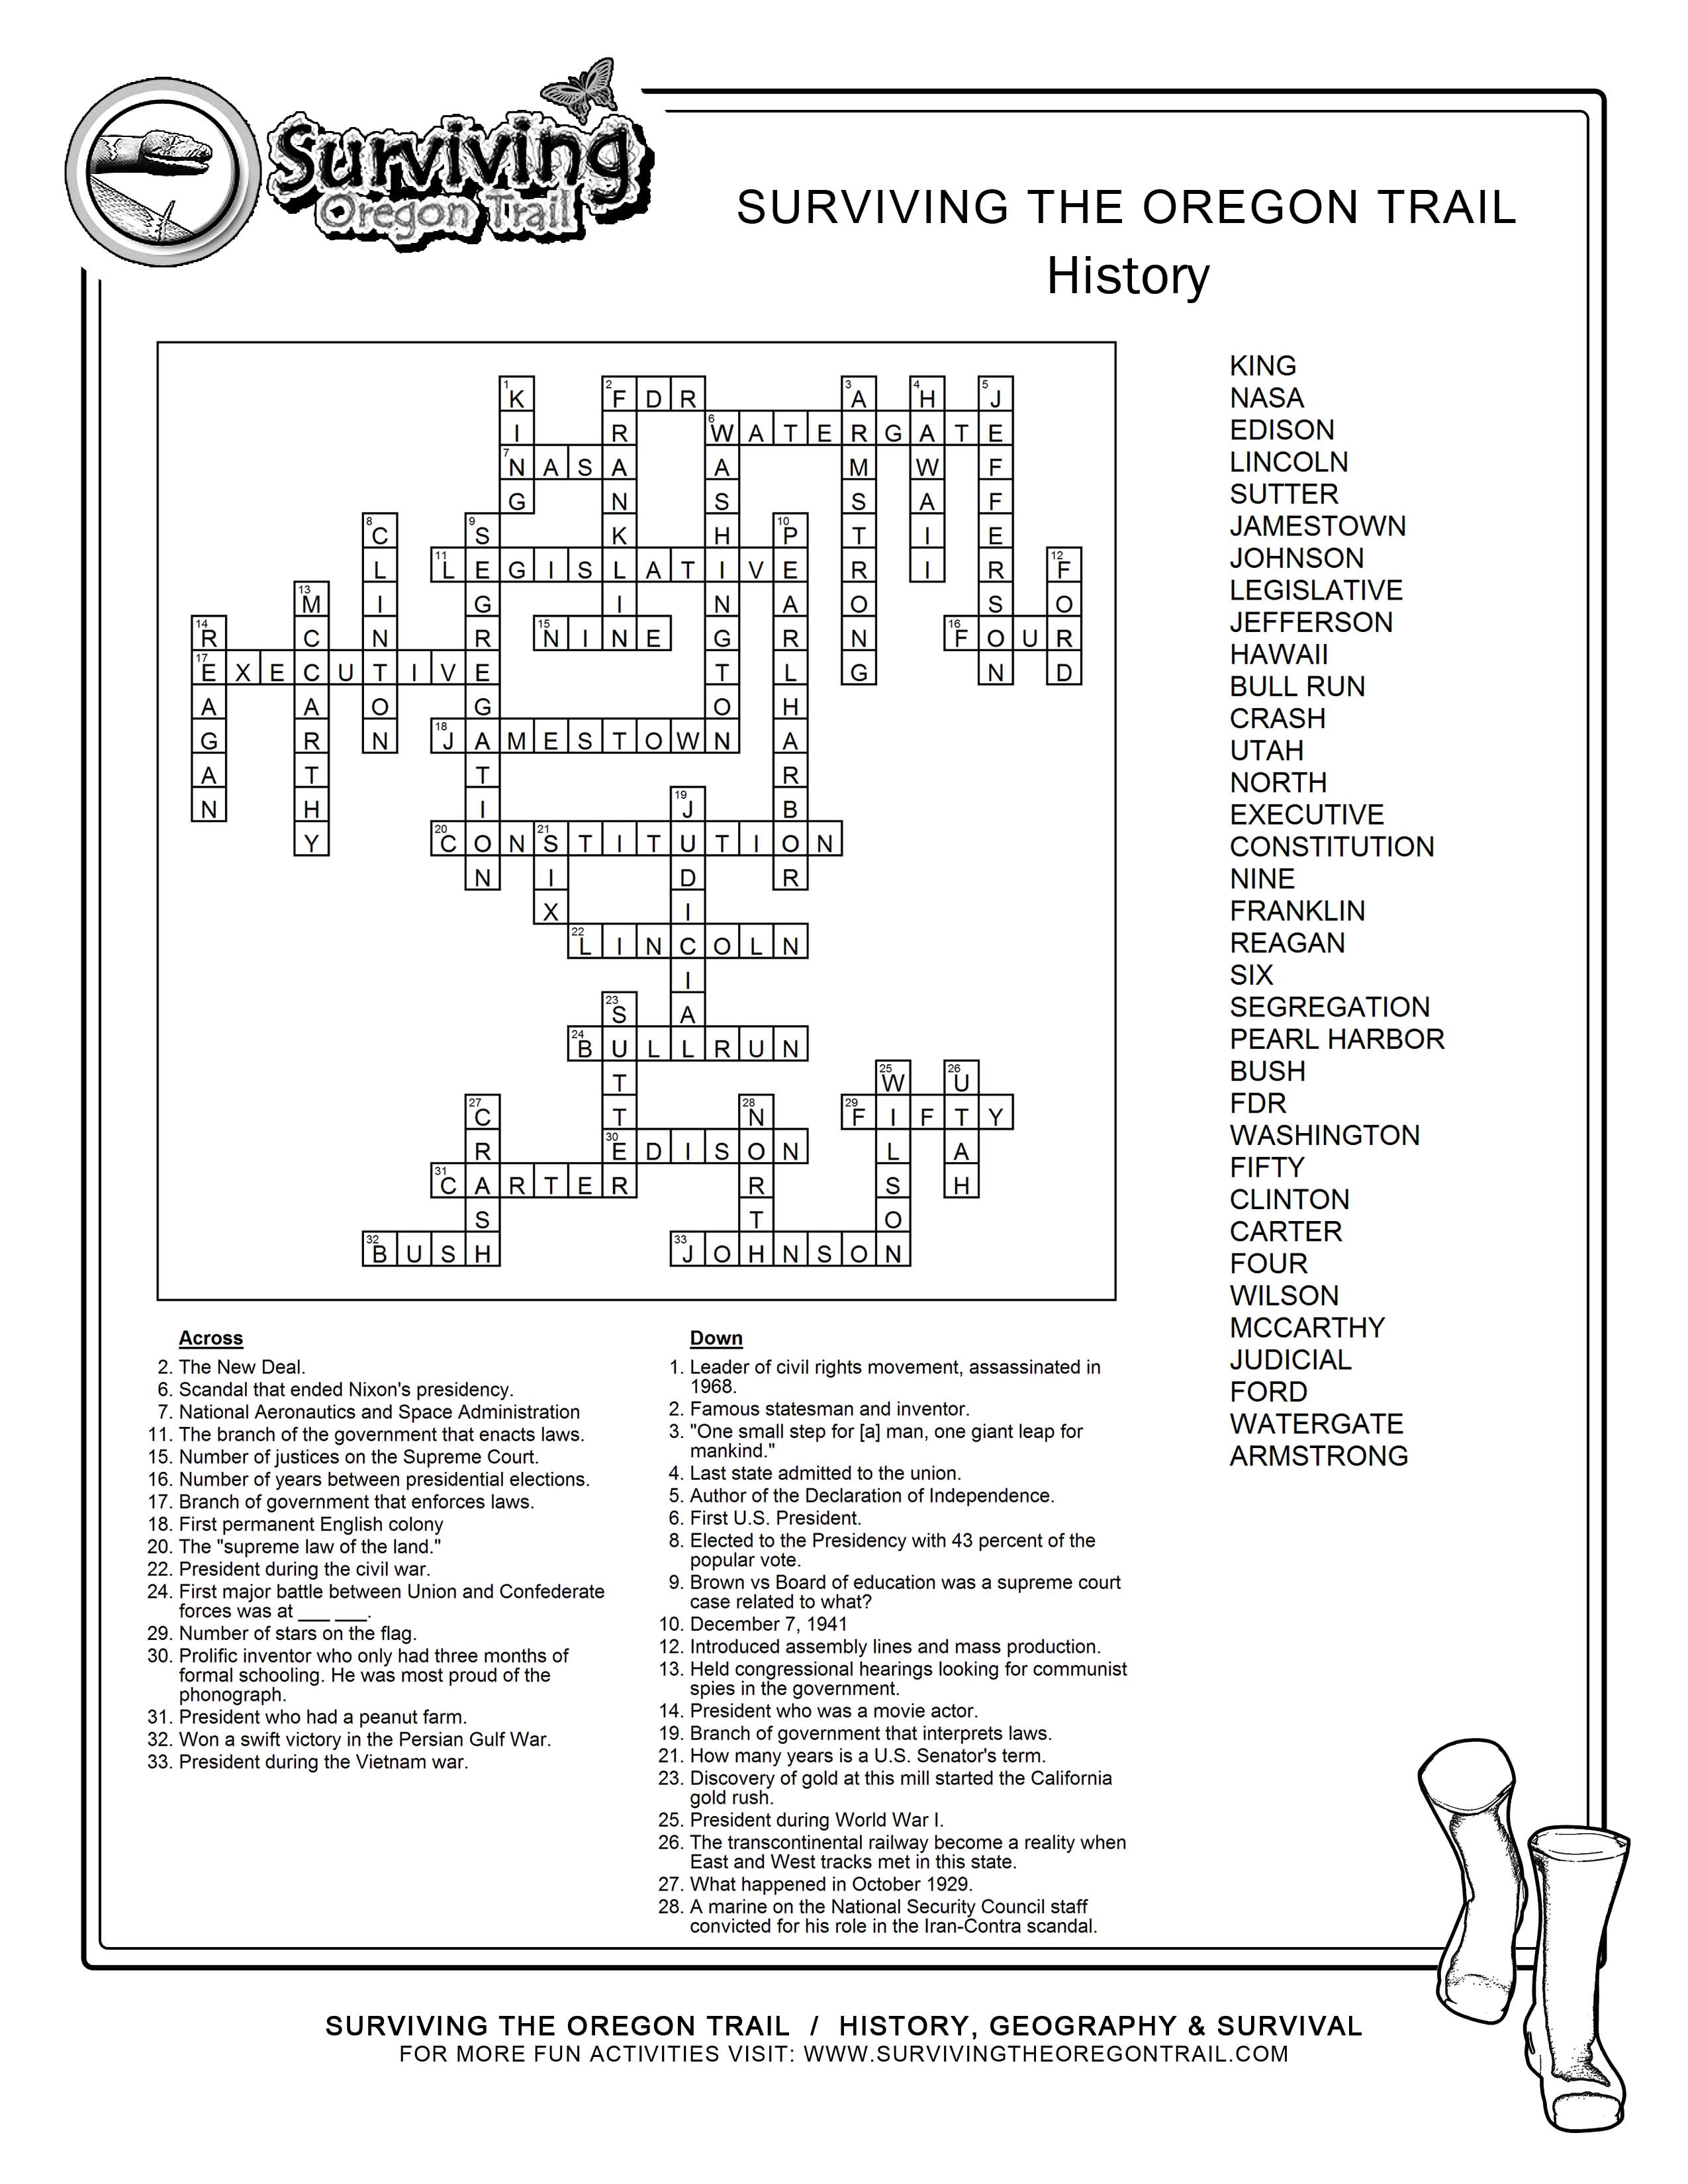 8 Best Images Of Printable Puzzles For Seniors Printable Adult Crossword Puzzles Large Printable Easy Crossword Puzzle And Large Printable Easy Crossword Puzzle Printablee Com,Anniversary Ideas For Husband